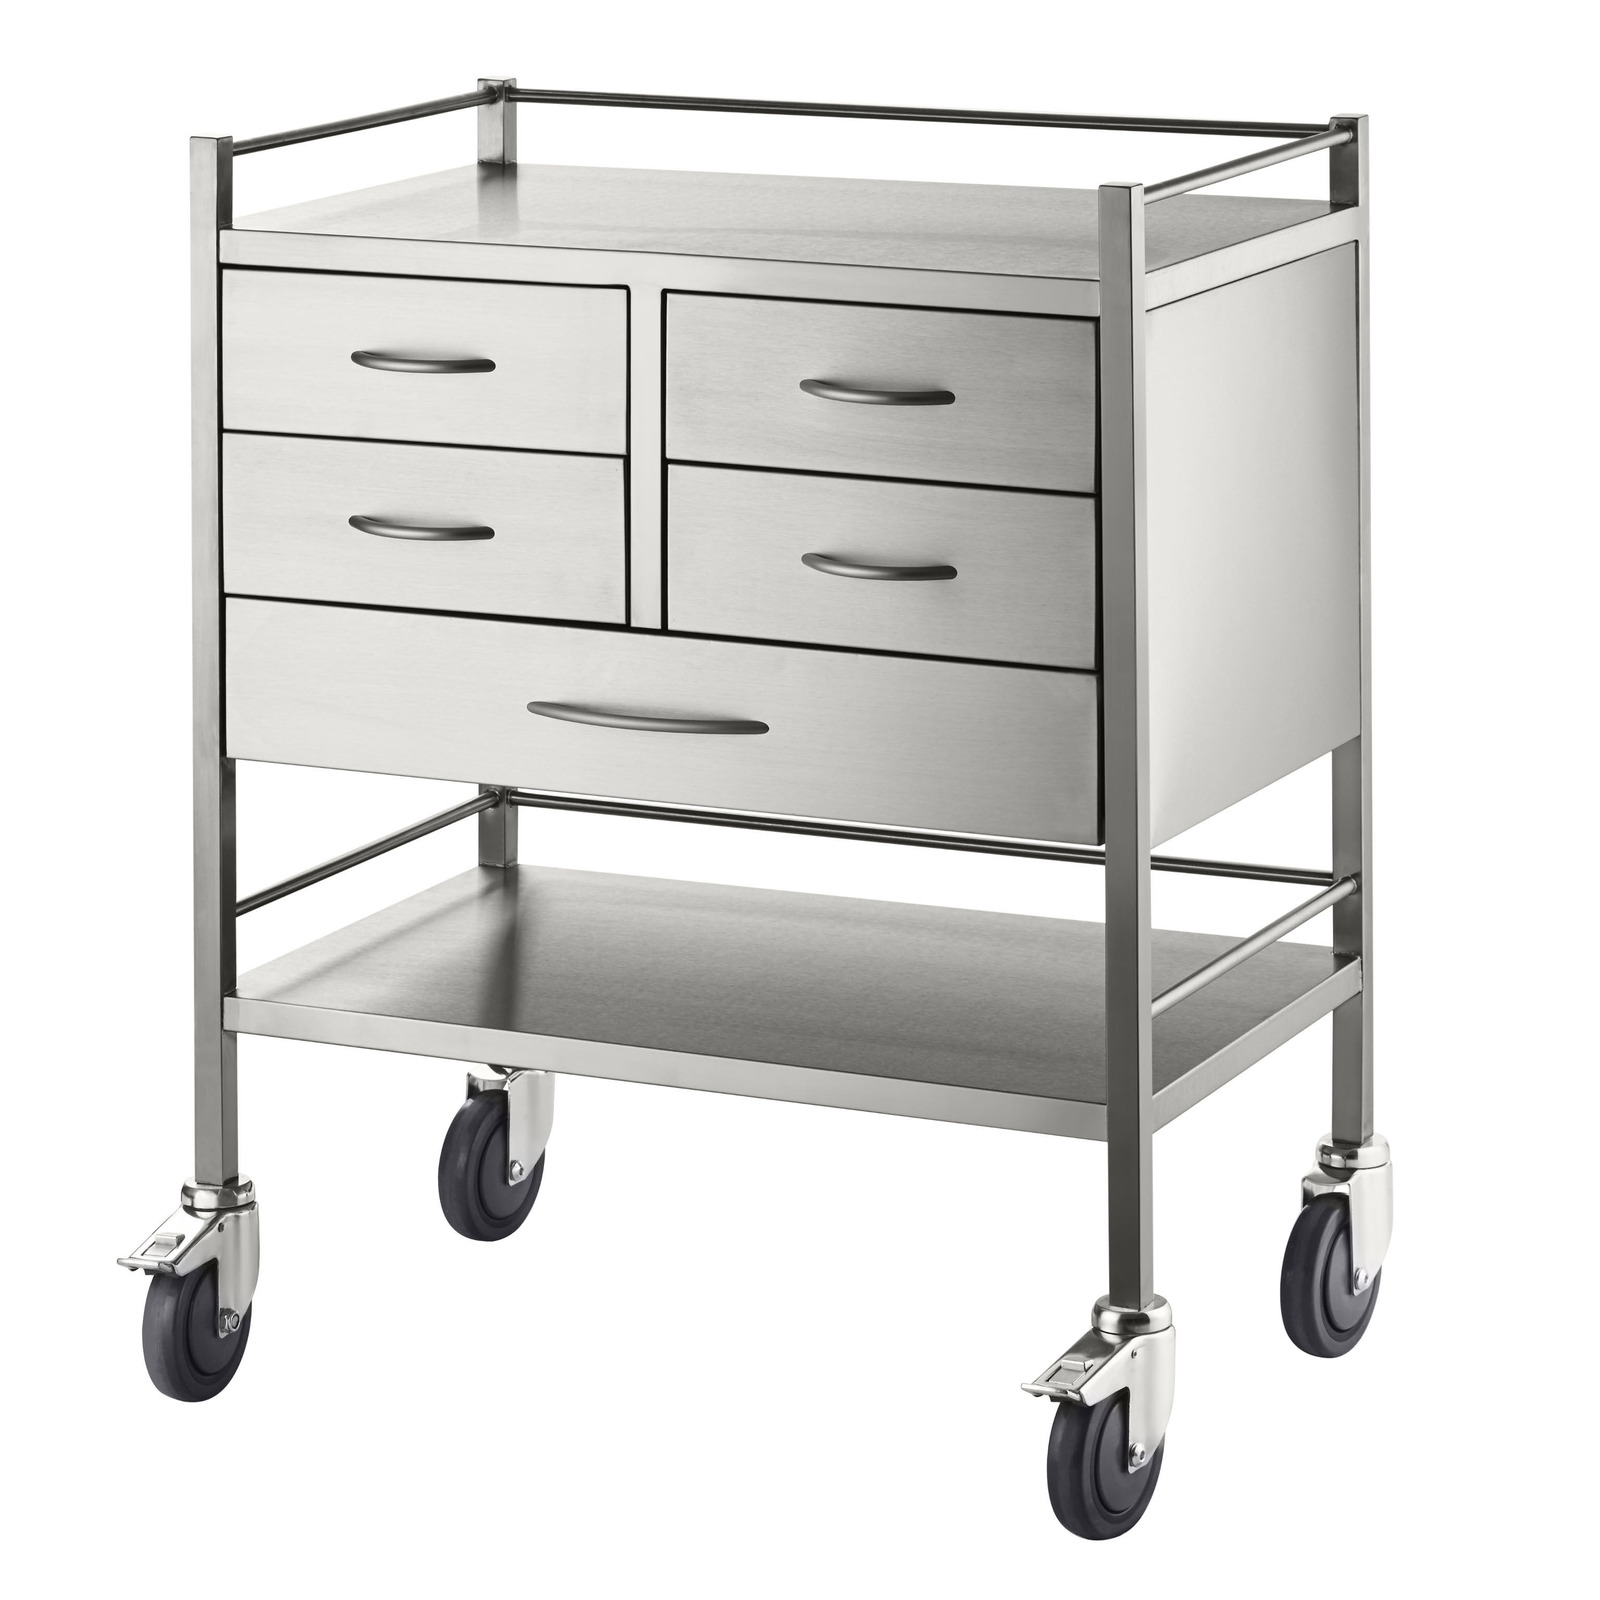 Stainless Steel Instrument Trolley (with 4 Half Drawers & 1 Full Drawer)